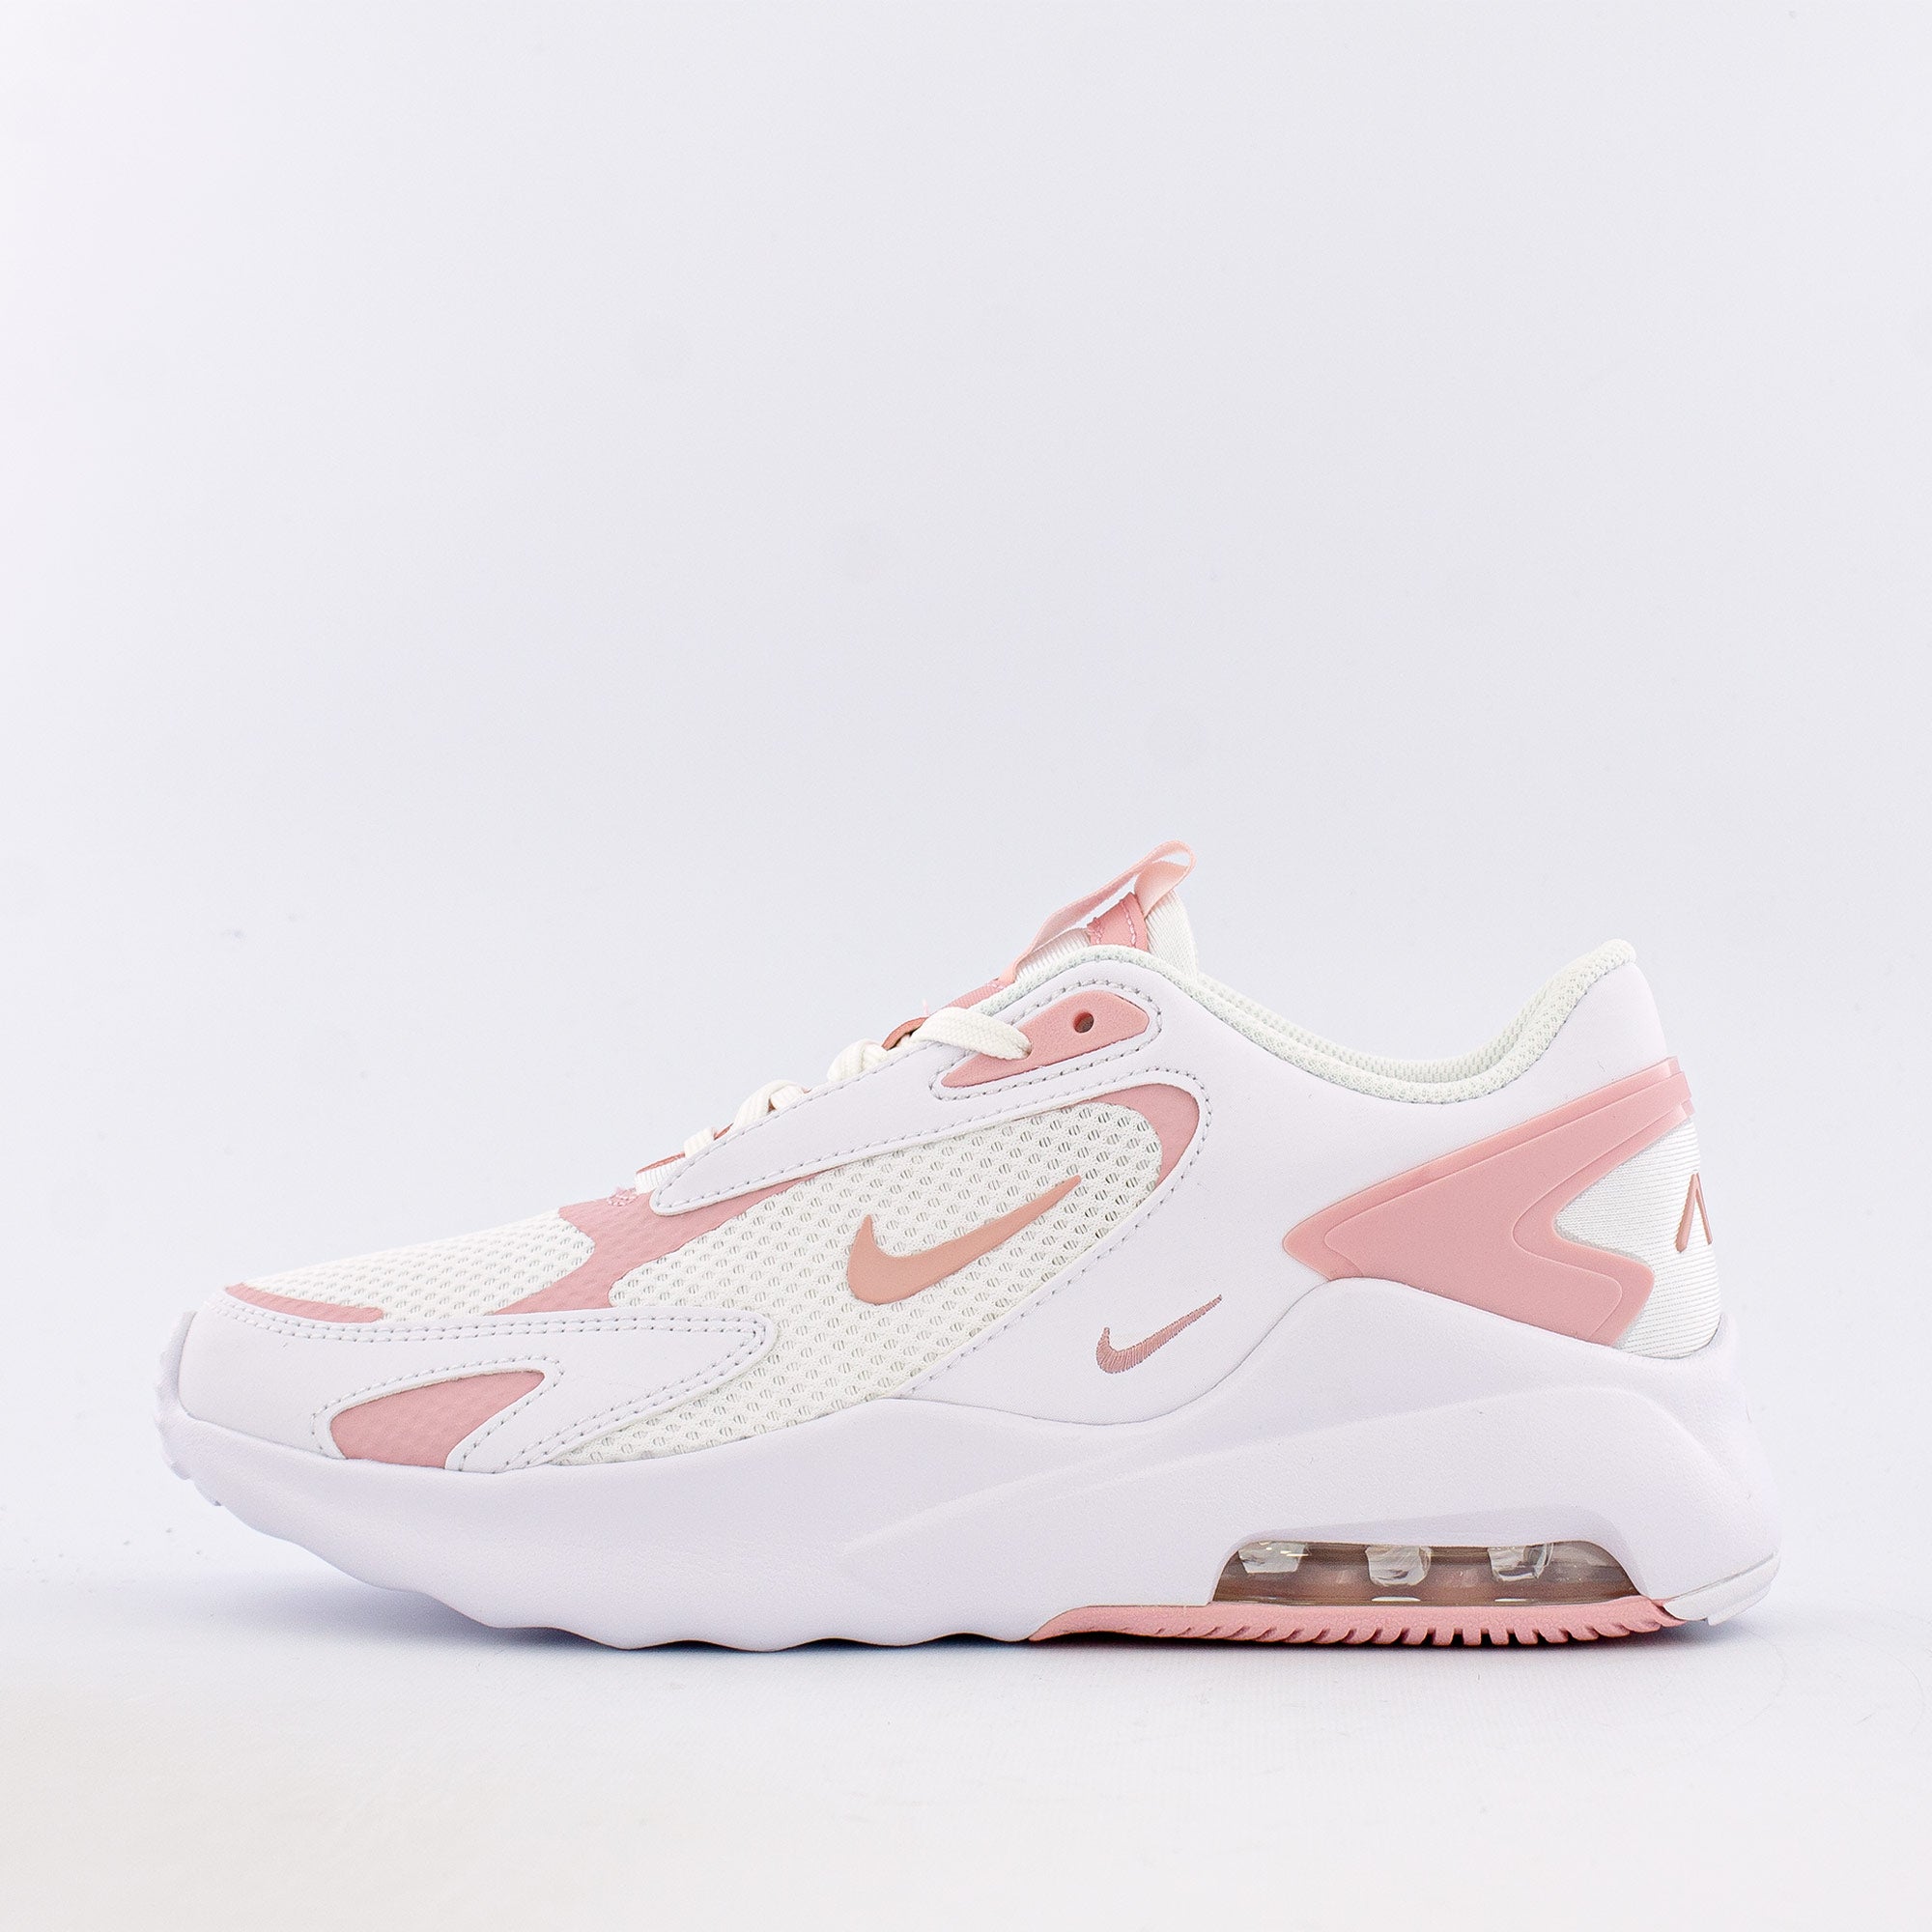 white & pink air max bolt trainers